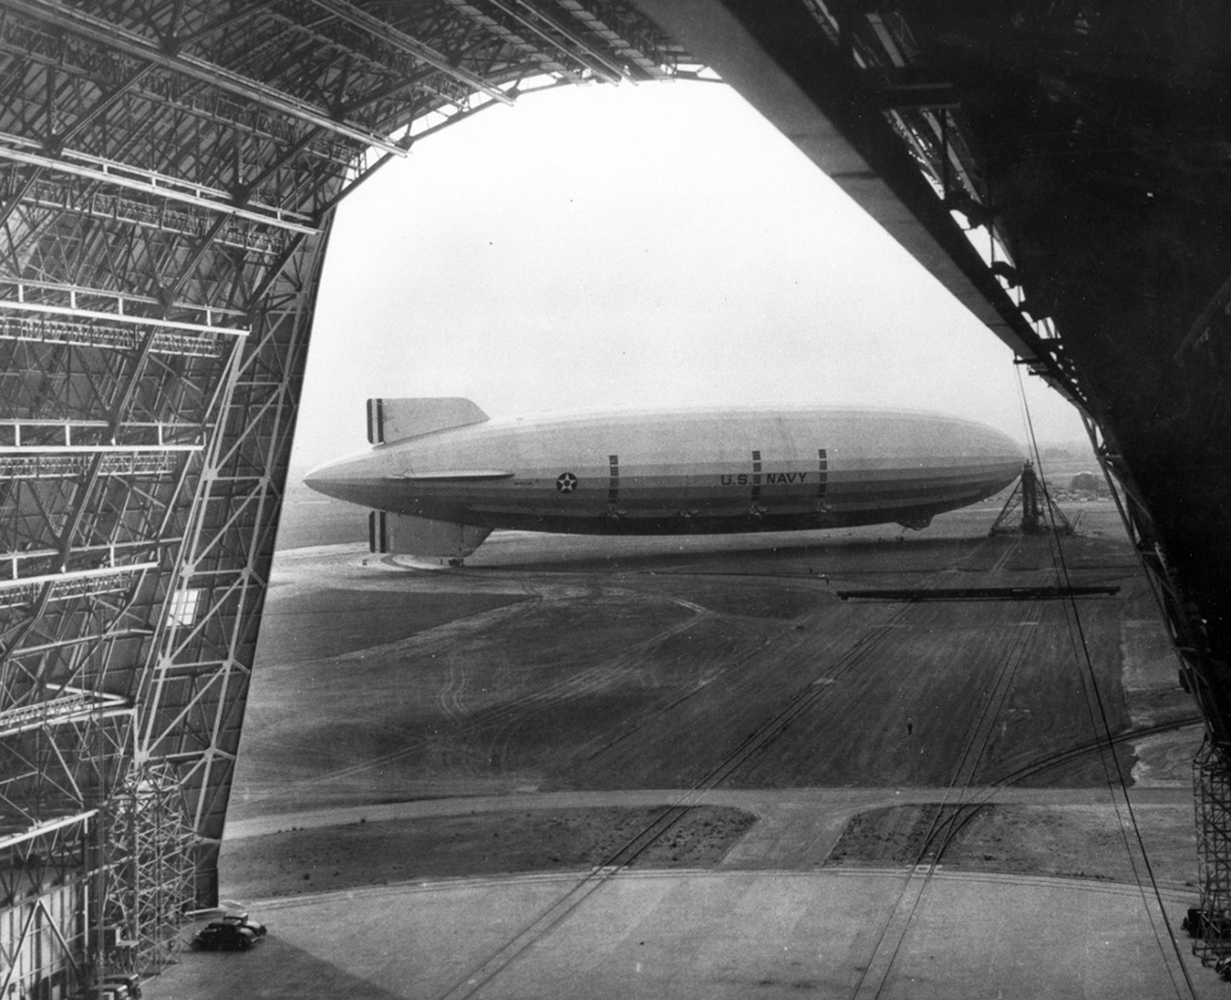 The USS Macon attached to its mooring mast. The full length view of the dirigible is taken from inside Hangar 1, through its huge open doors.